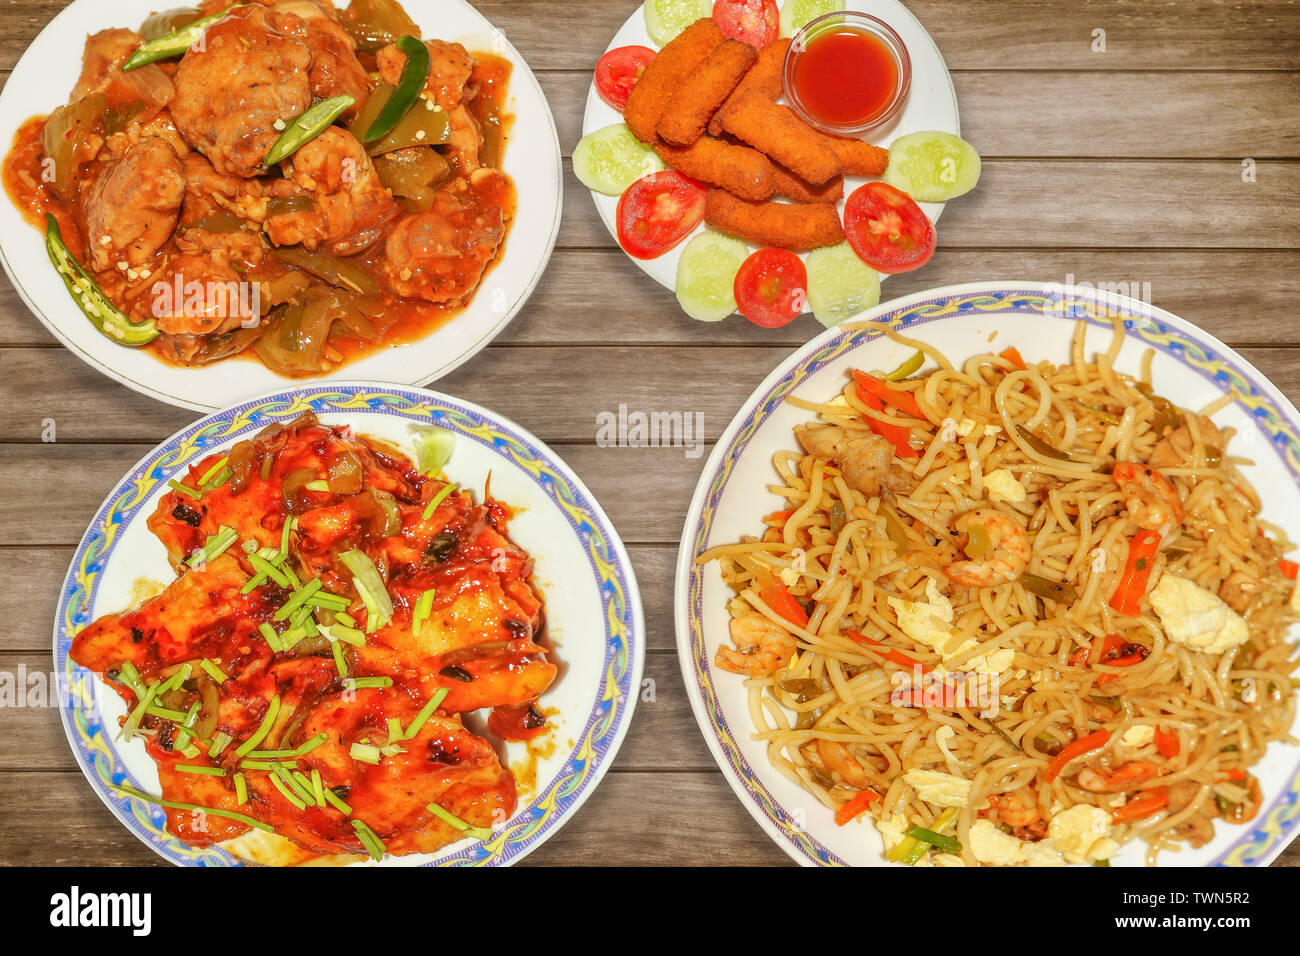 Indian food meal of spicy chicken chowmein with chilli chicken and red hot chilli fish along with crispy fish fingers served on wooden table Stock Photo